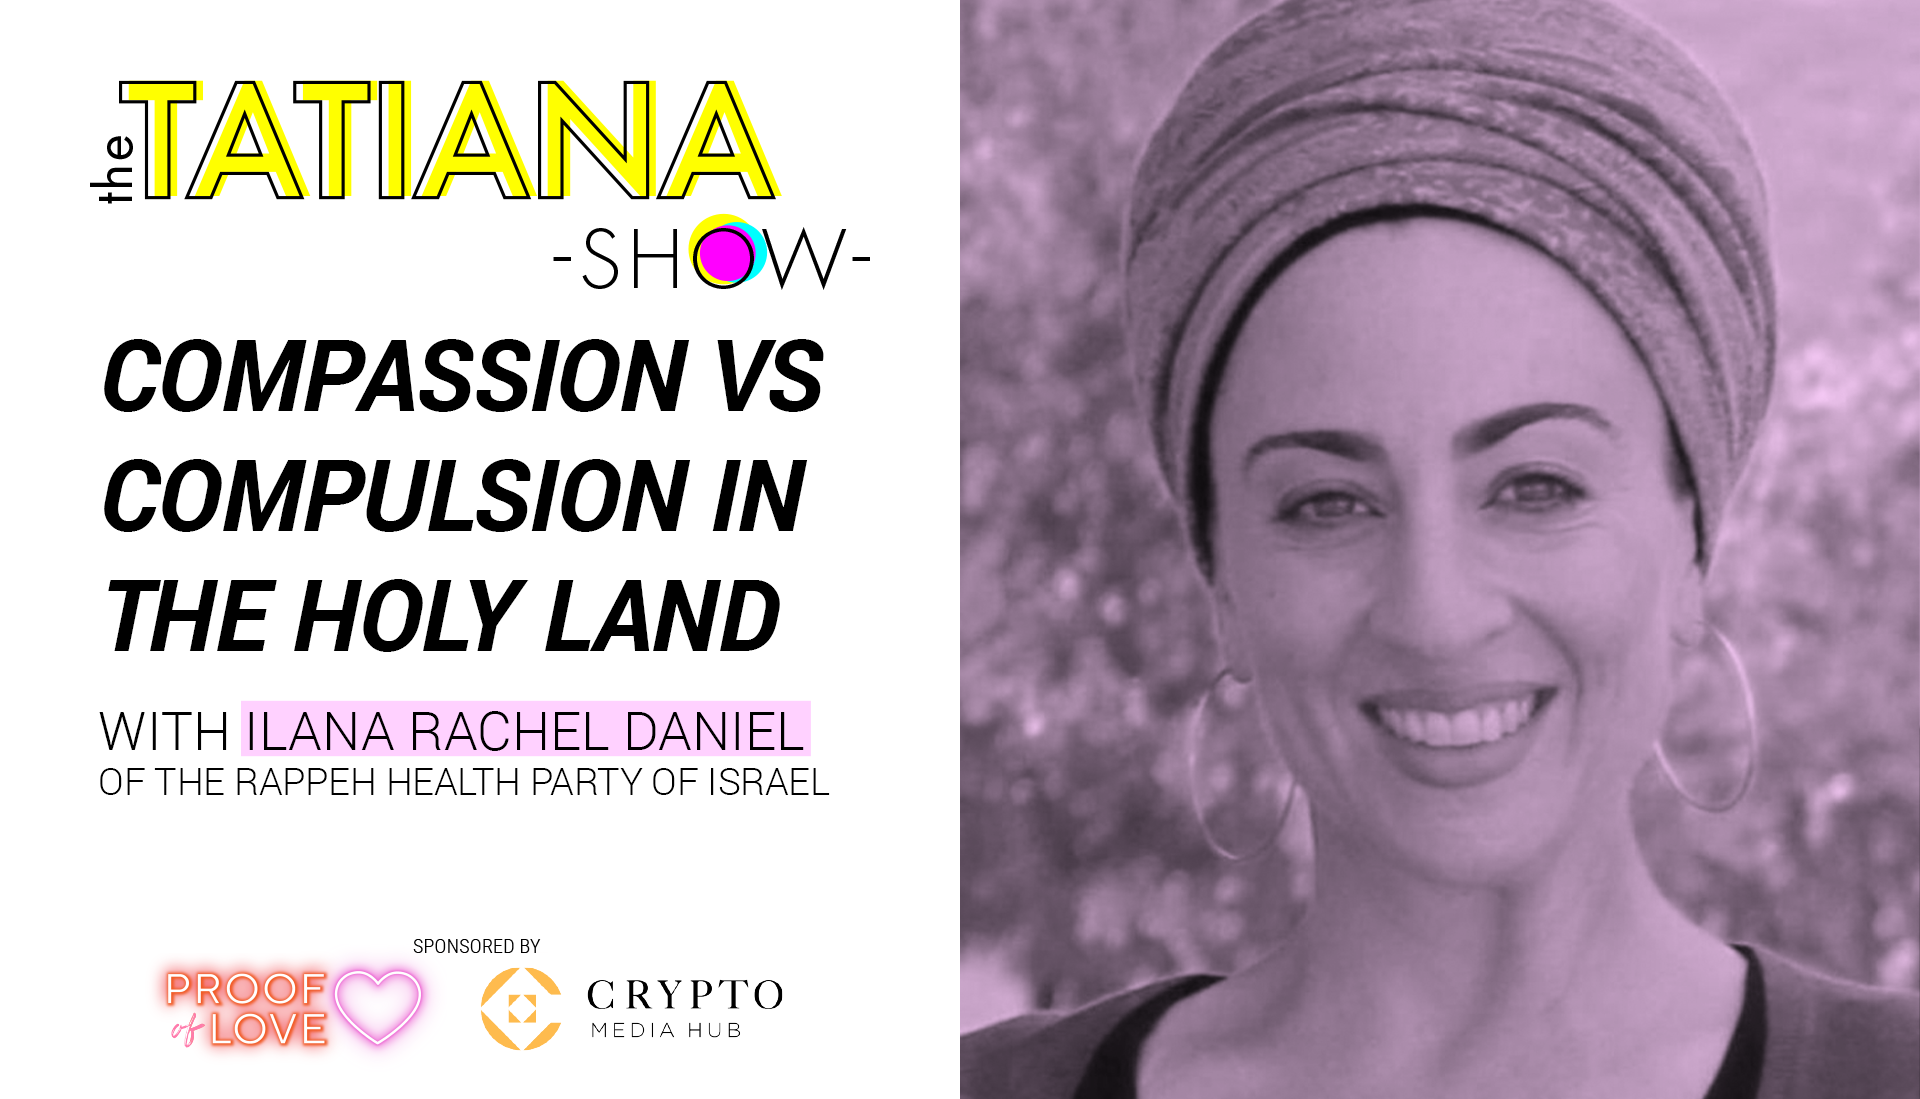 Compassion vs. Compulsion in the Holy Land with Ilana Rachel Daniel of the Rappeh Health Party of Israel